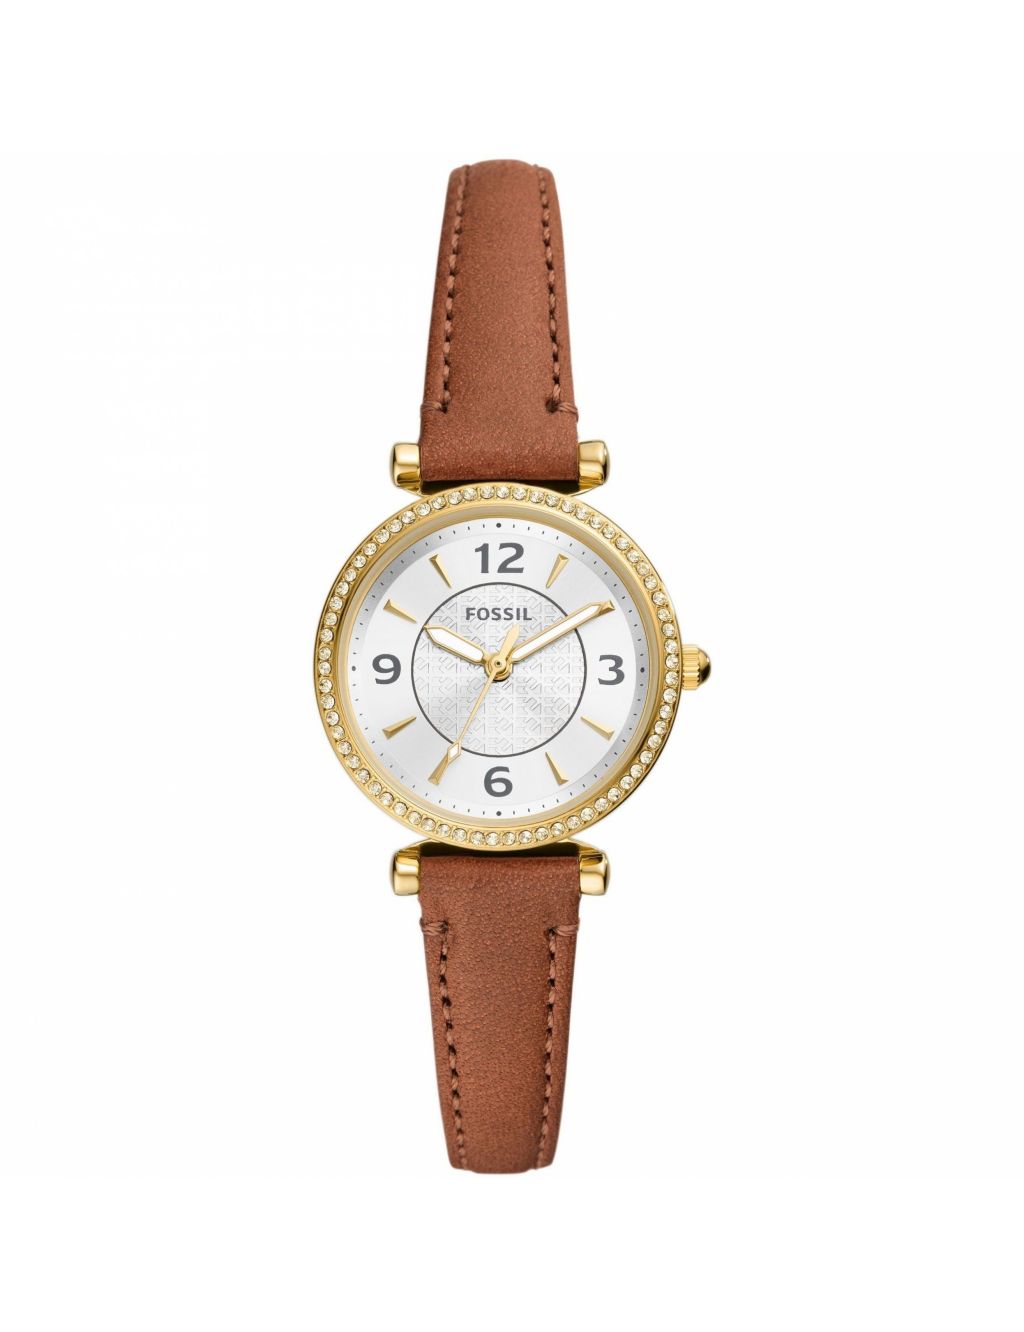 Fossil Carlie Leather Watch